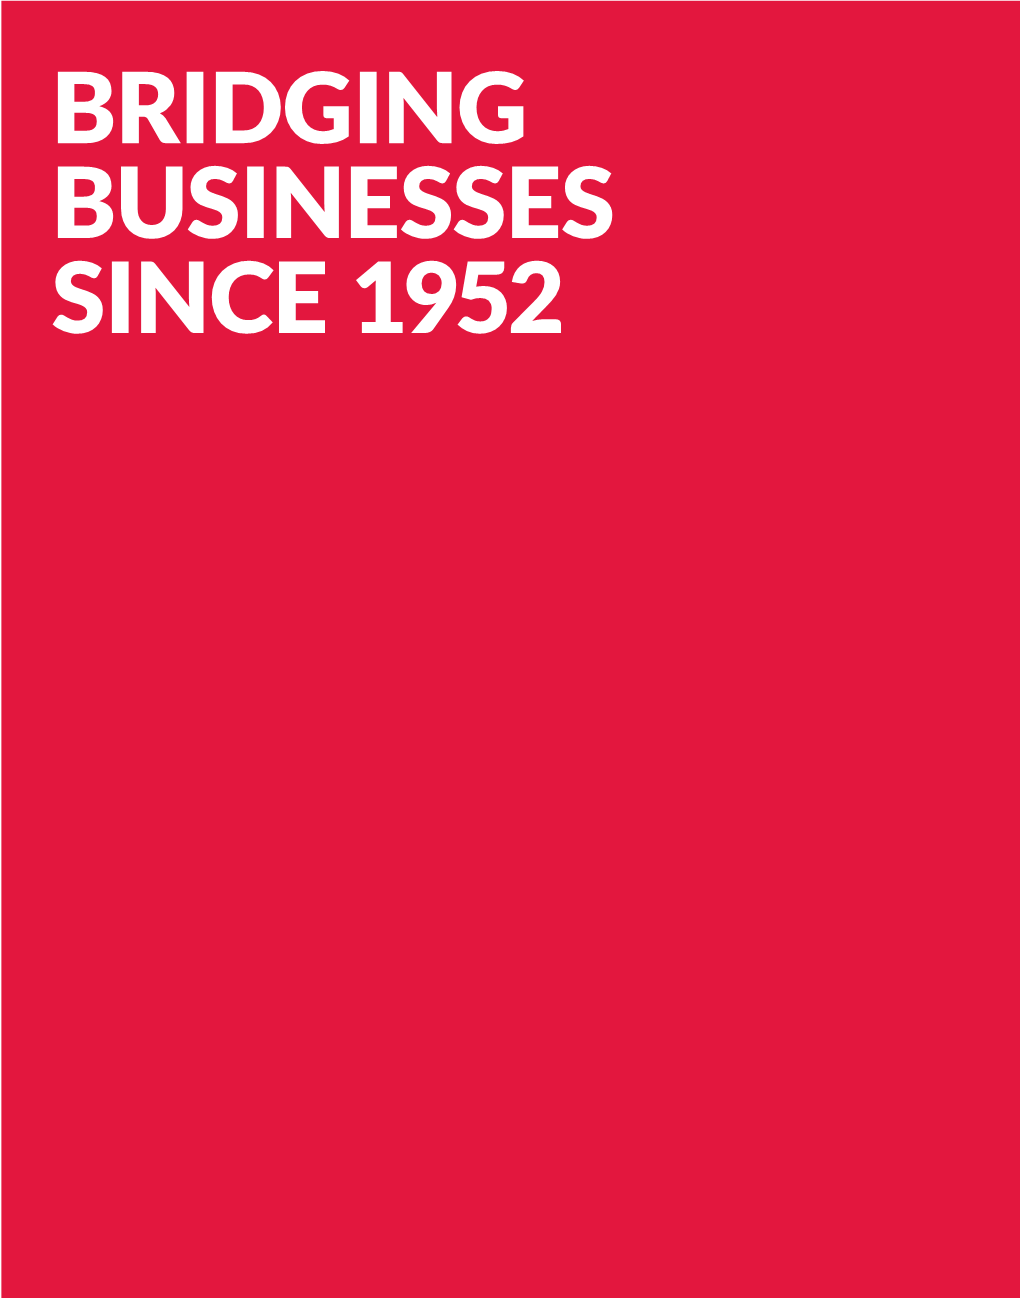 BRIDGING BUSINESSES SINCE 1952 | BRIDGING BUSINESSES SINCE 1952 Message from Group Managing Director 2